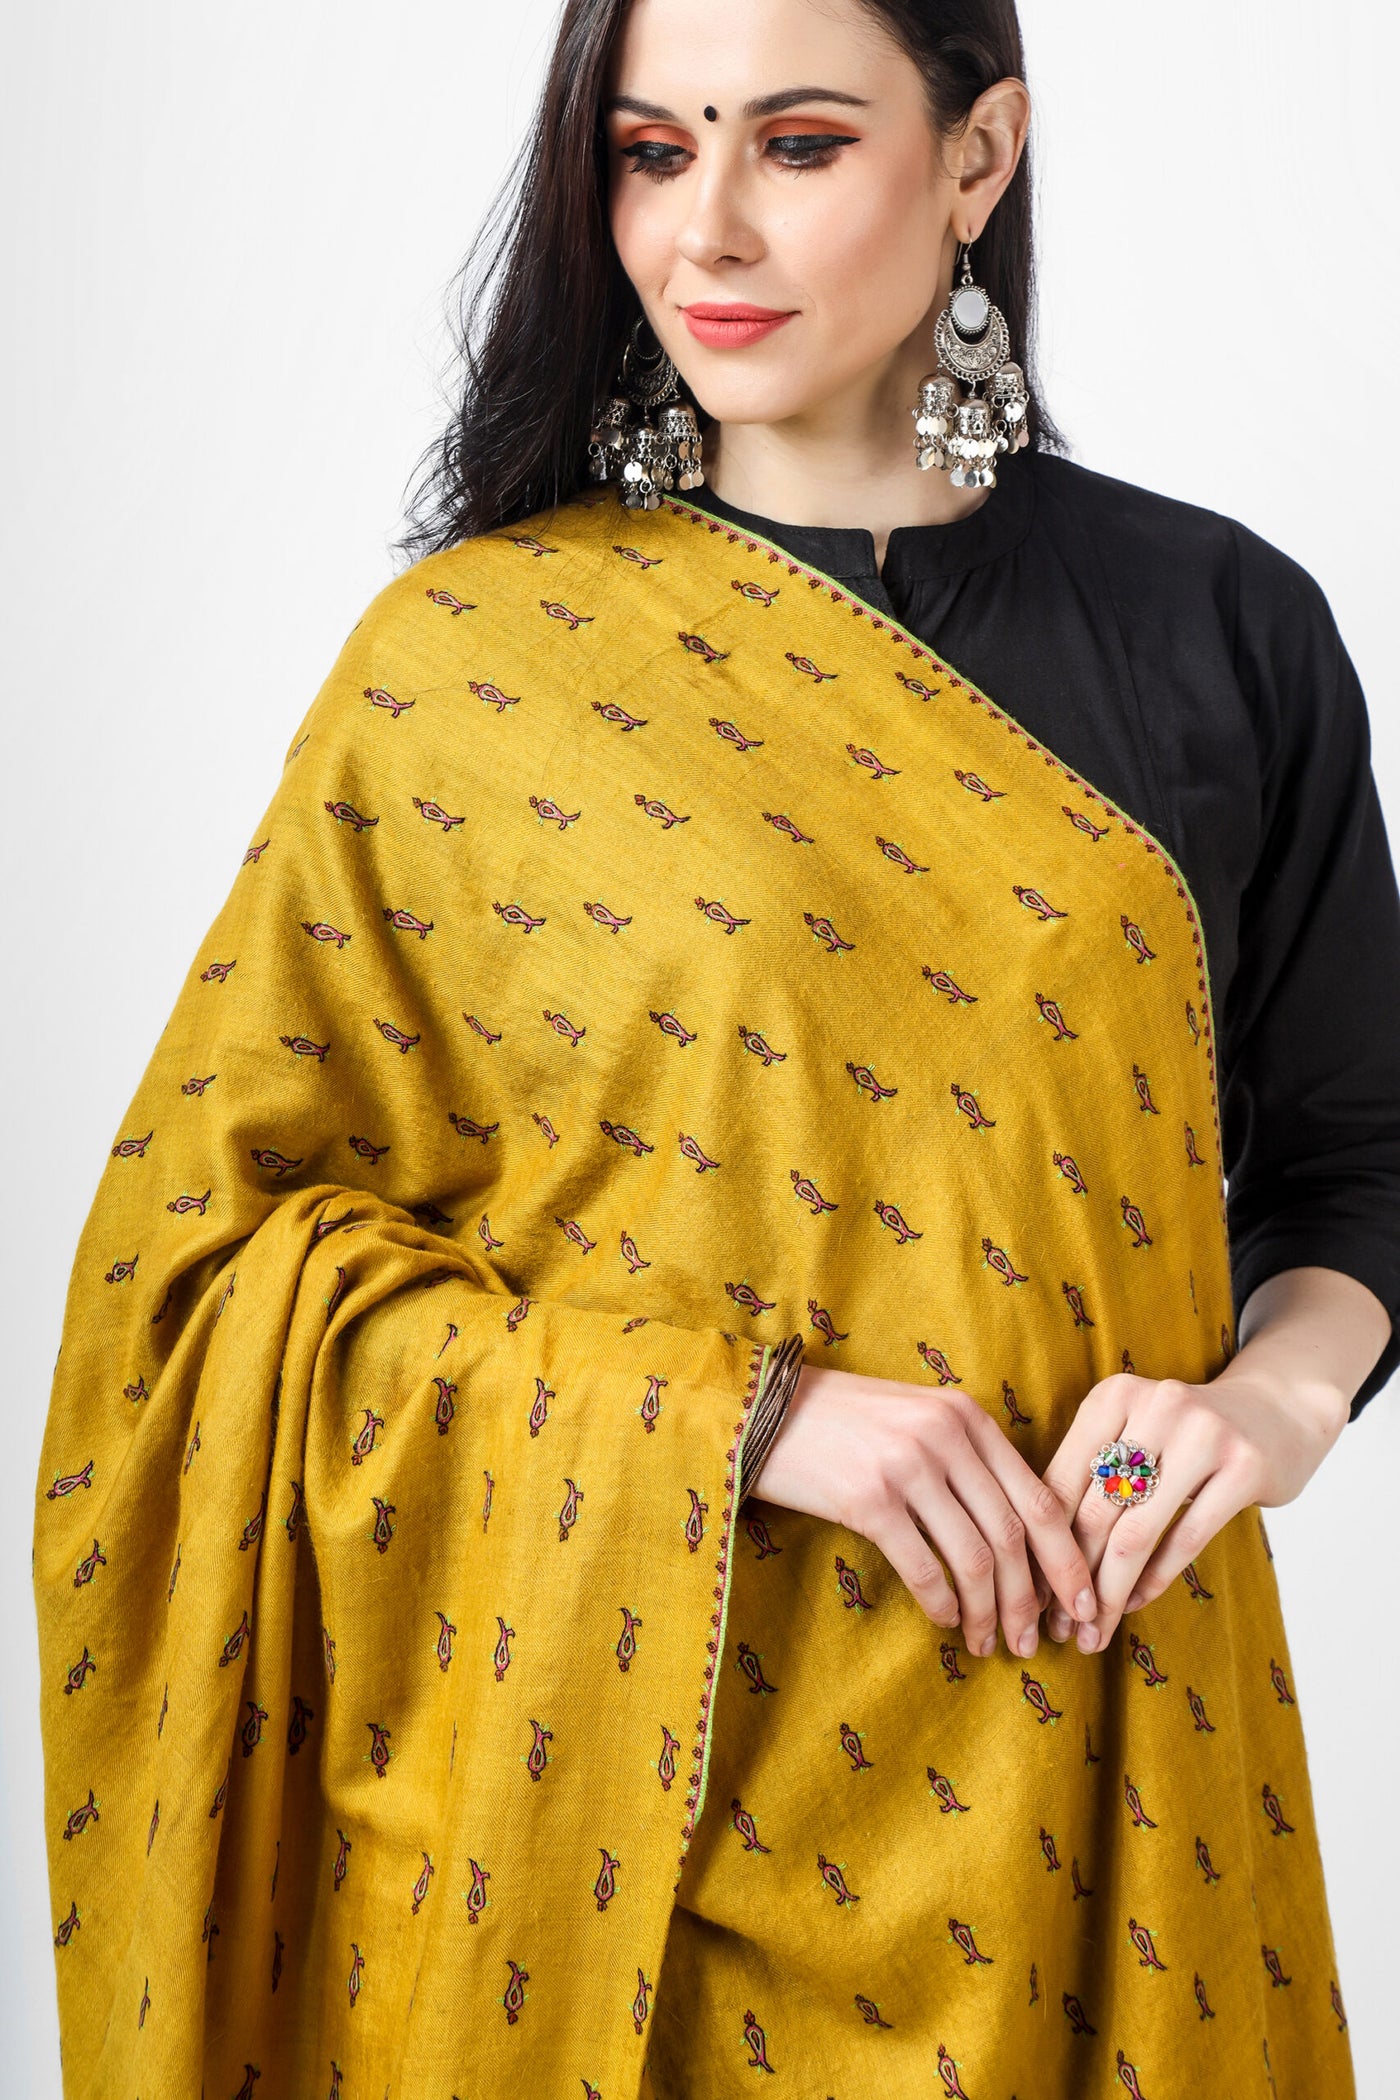 The Mustard Pashmina Shawl mentioned above is an exquisite shawl that showcases the intricate and fine Sozni Embroidery. This type of embroidery is done all over the shawl in a traditional bootidaar pattern. With its unique design and high-quality craftsmanship, this shawl is sure to make you stand out in any crowd.